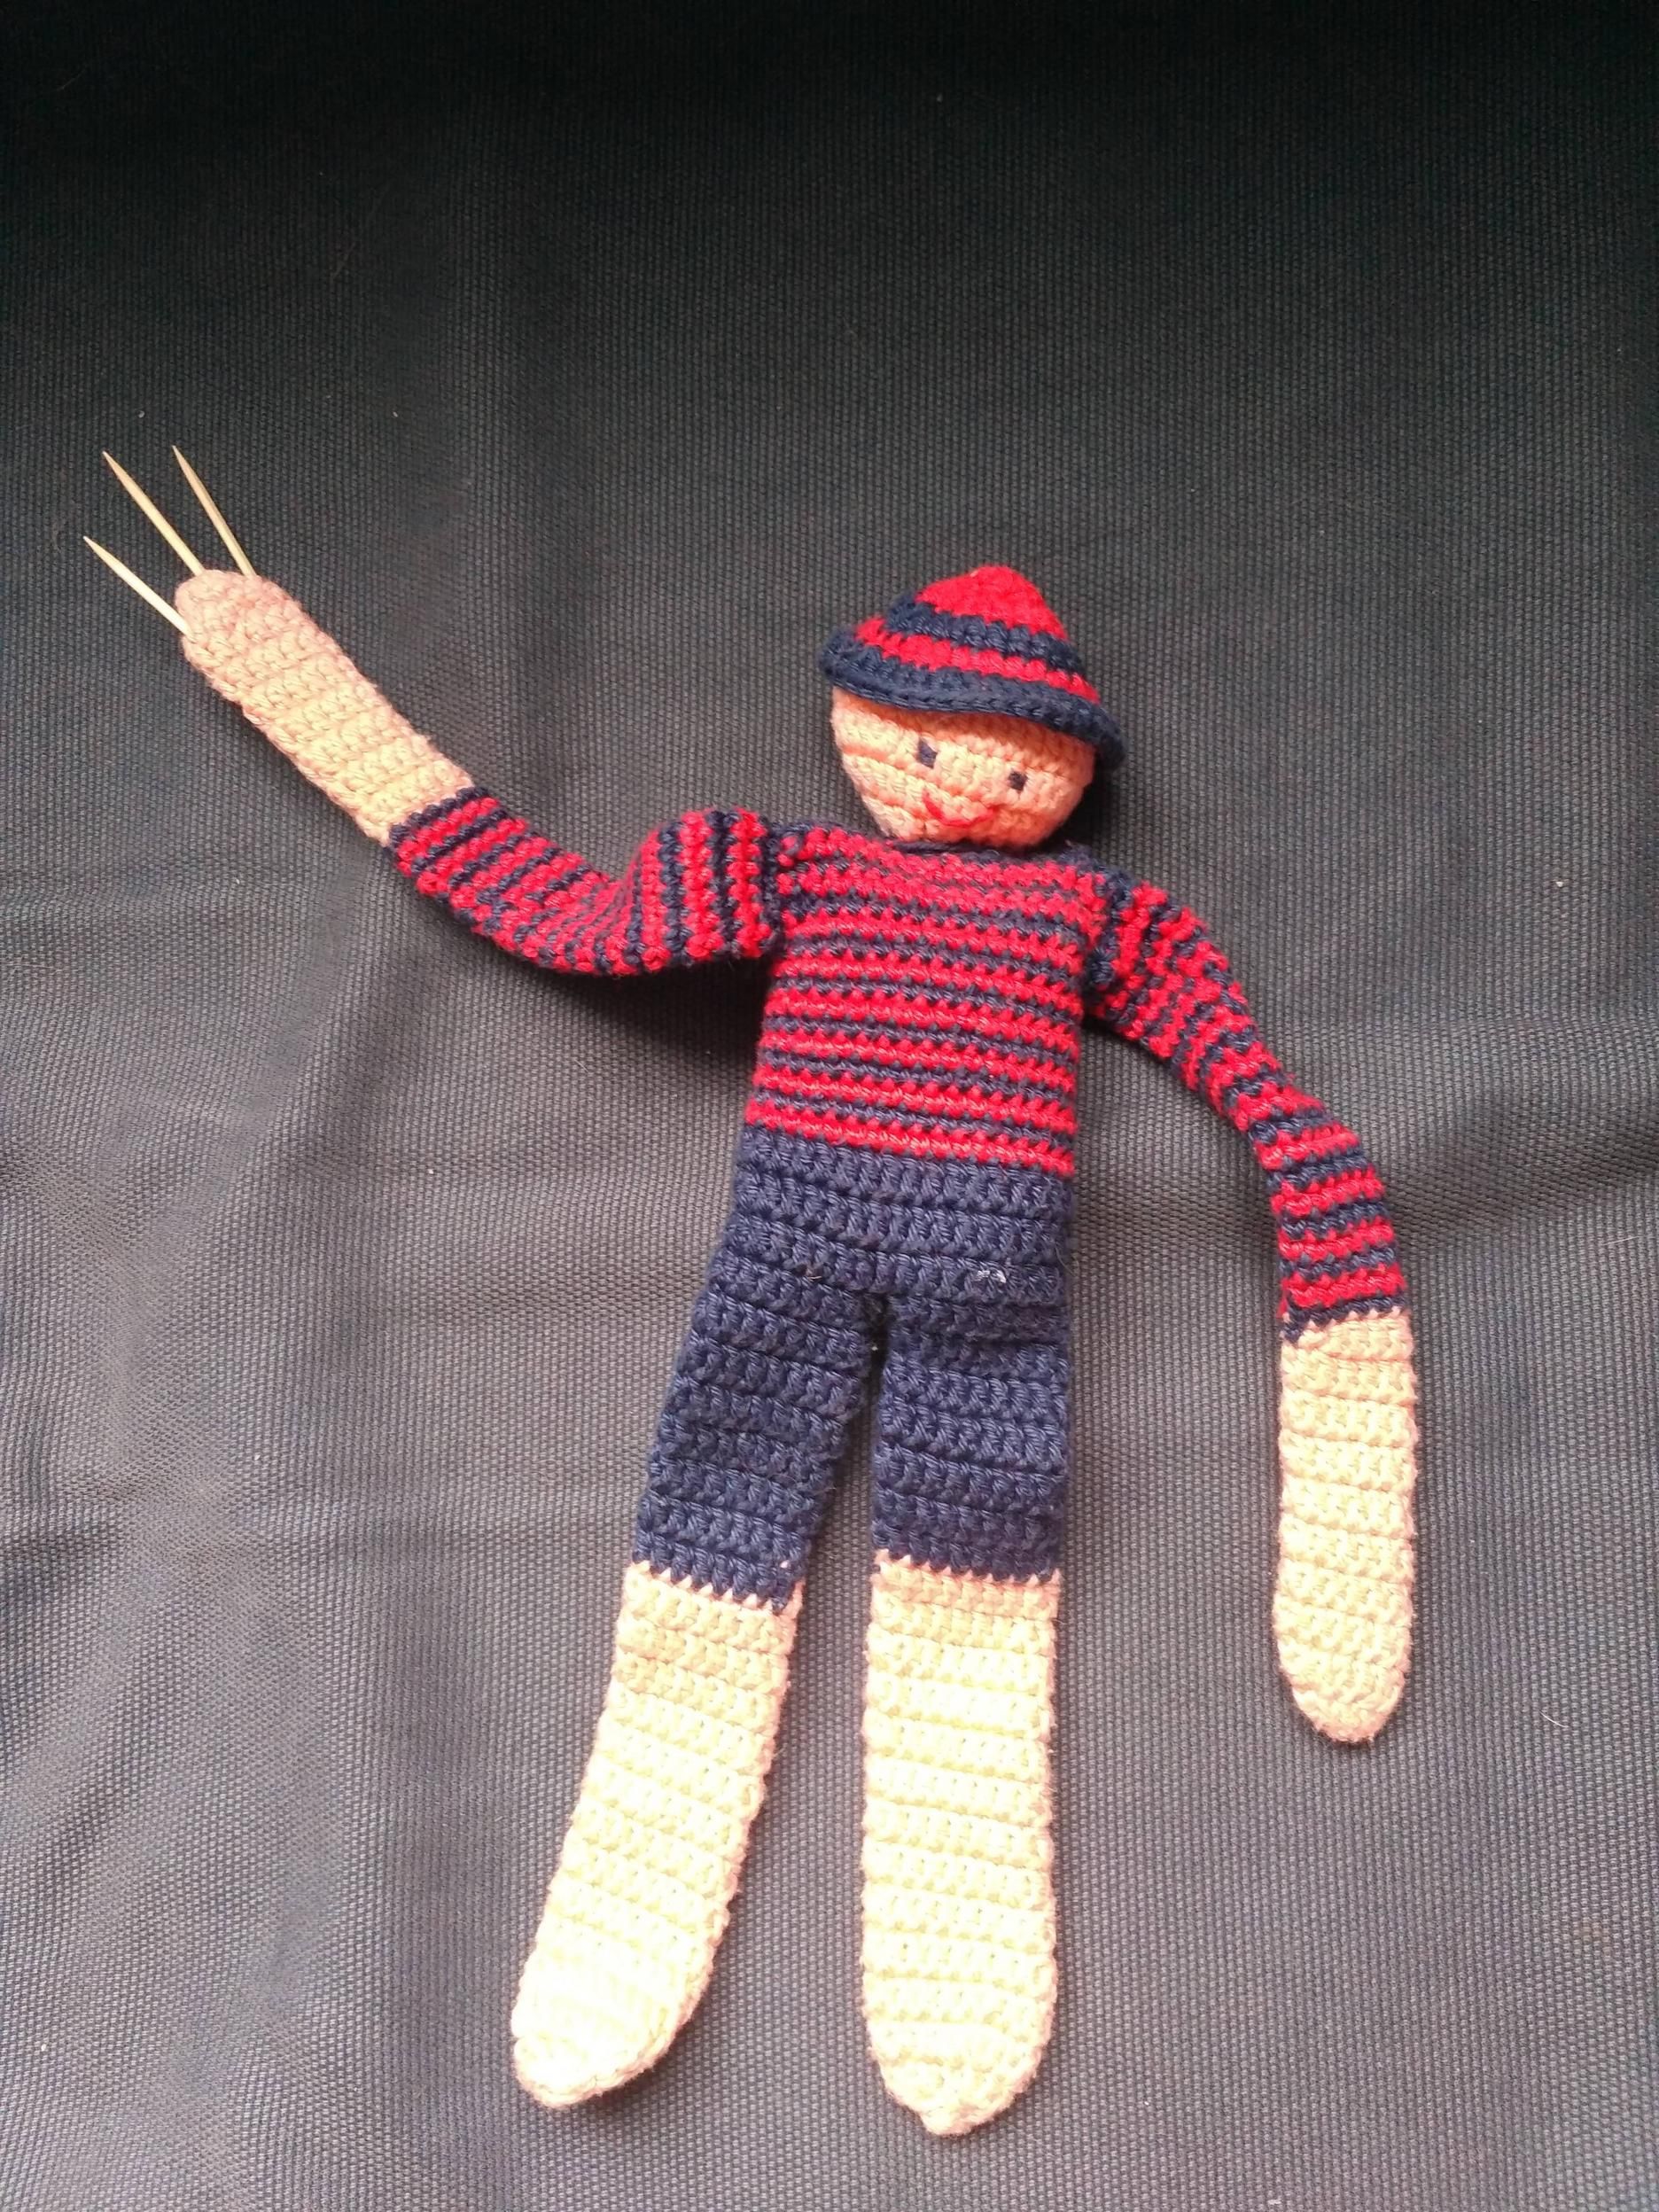 My aunt made a knitted toy for my son. I added toothpicks.